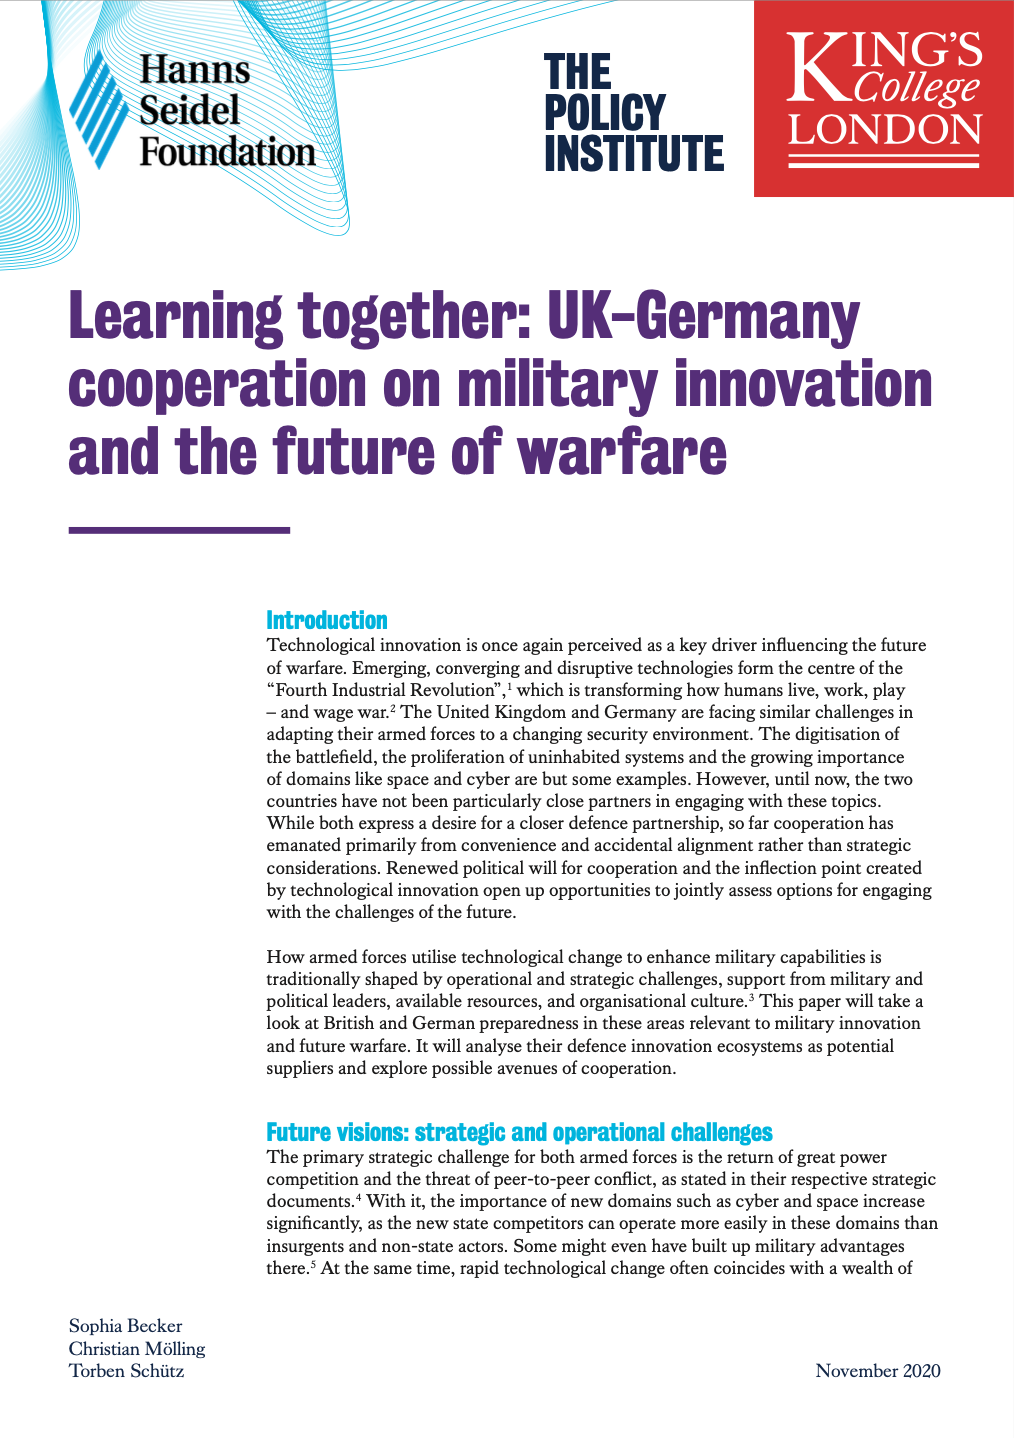 UK-Germany Military Innovation Cover 